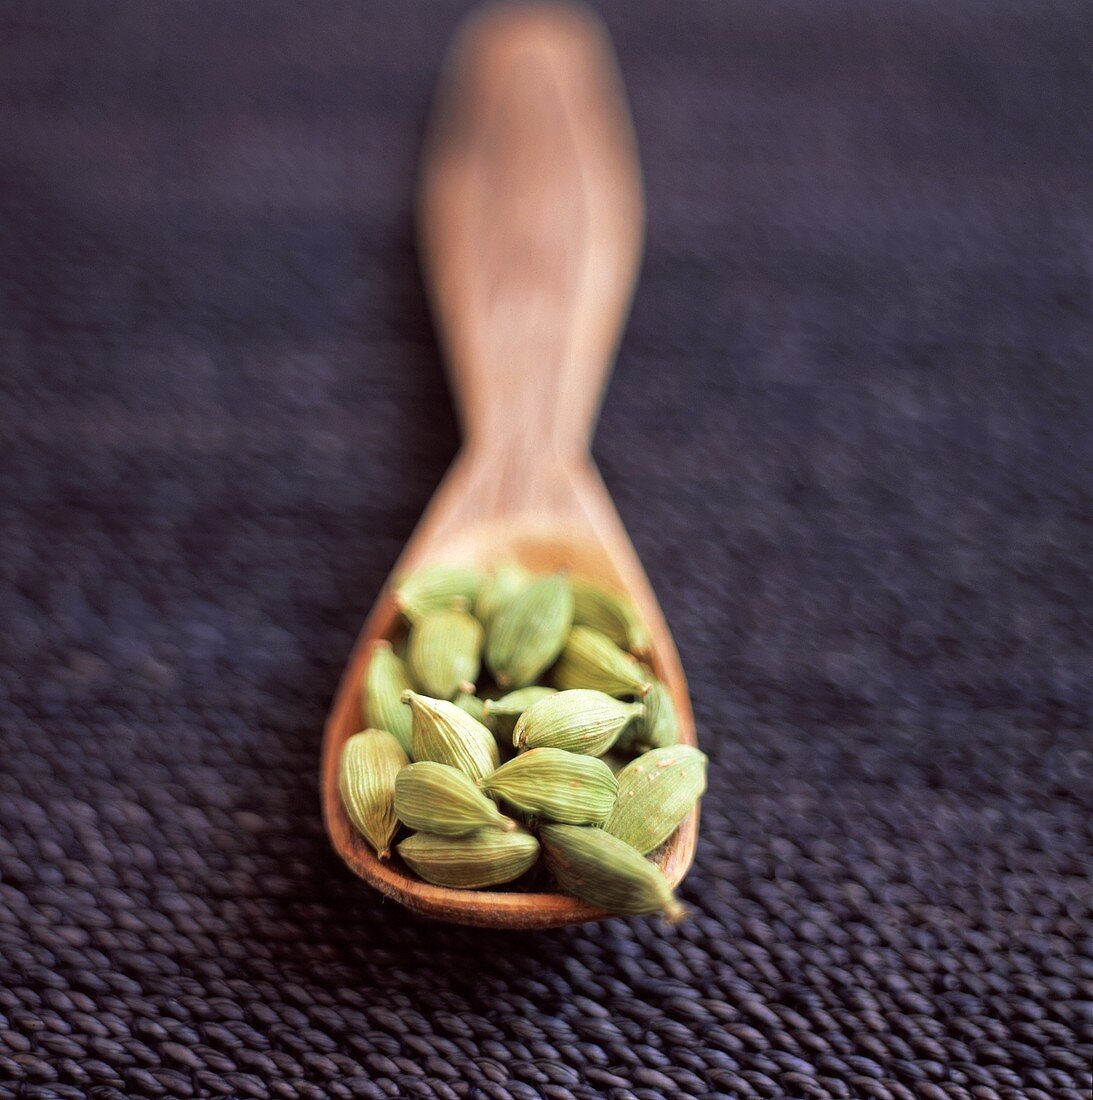 Cardamom on a Wooden Spoon